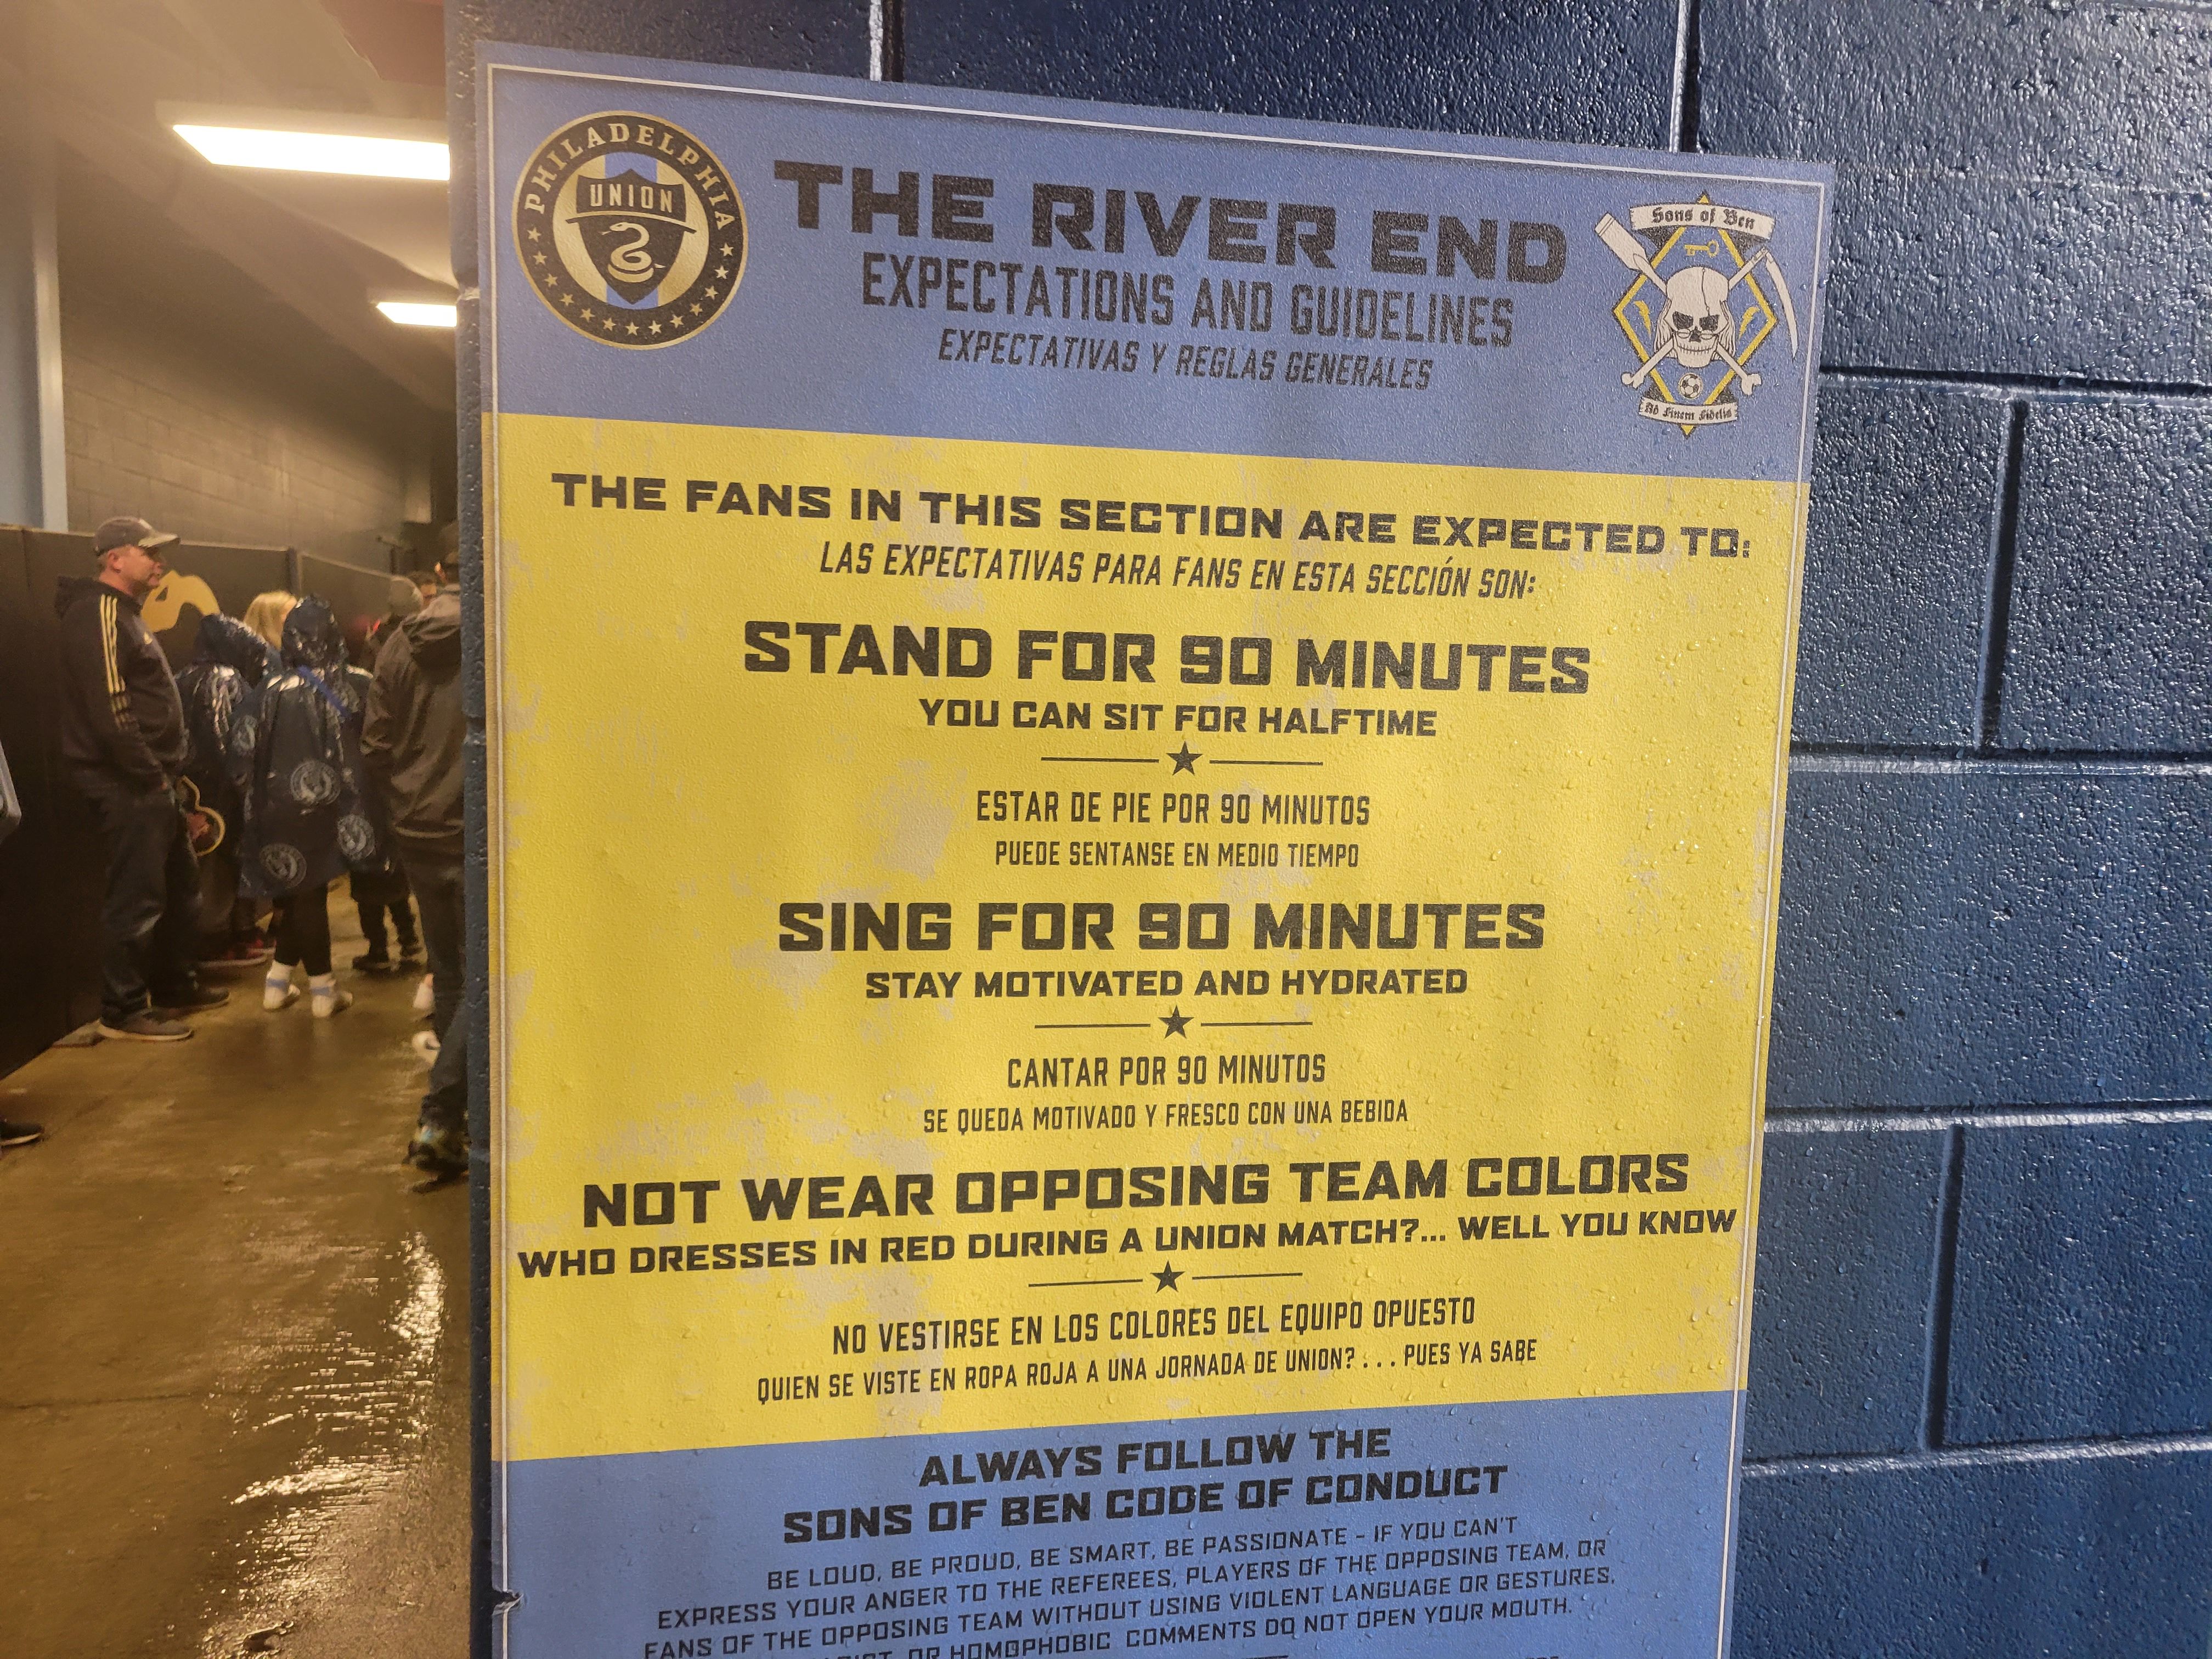 A sign outlines expectations for Union fans sitting in the River End of Subaru Park.